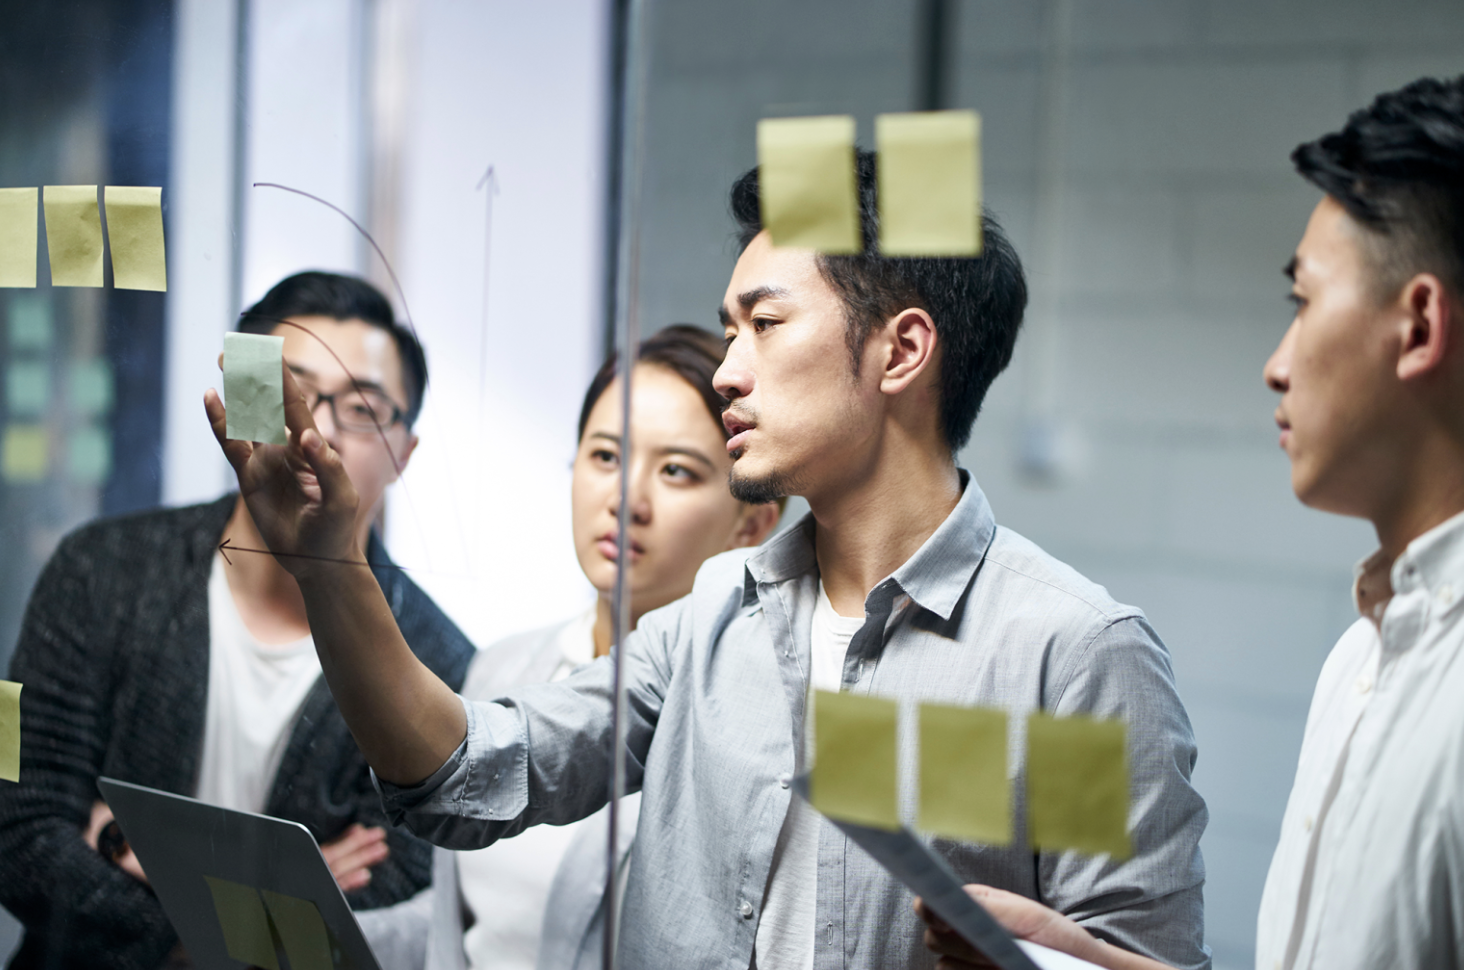 Group of people standing around a glass screen with post it notes on it.